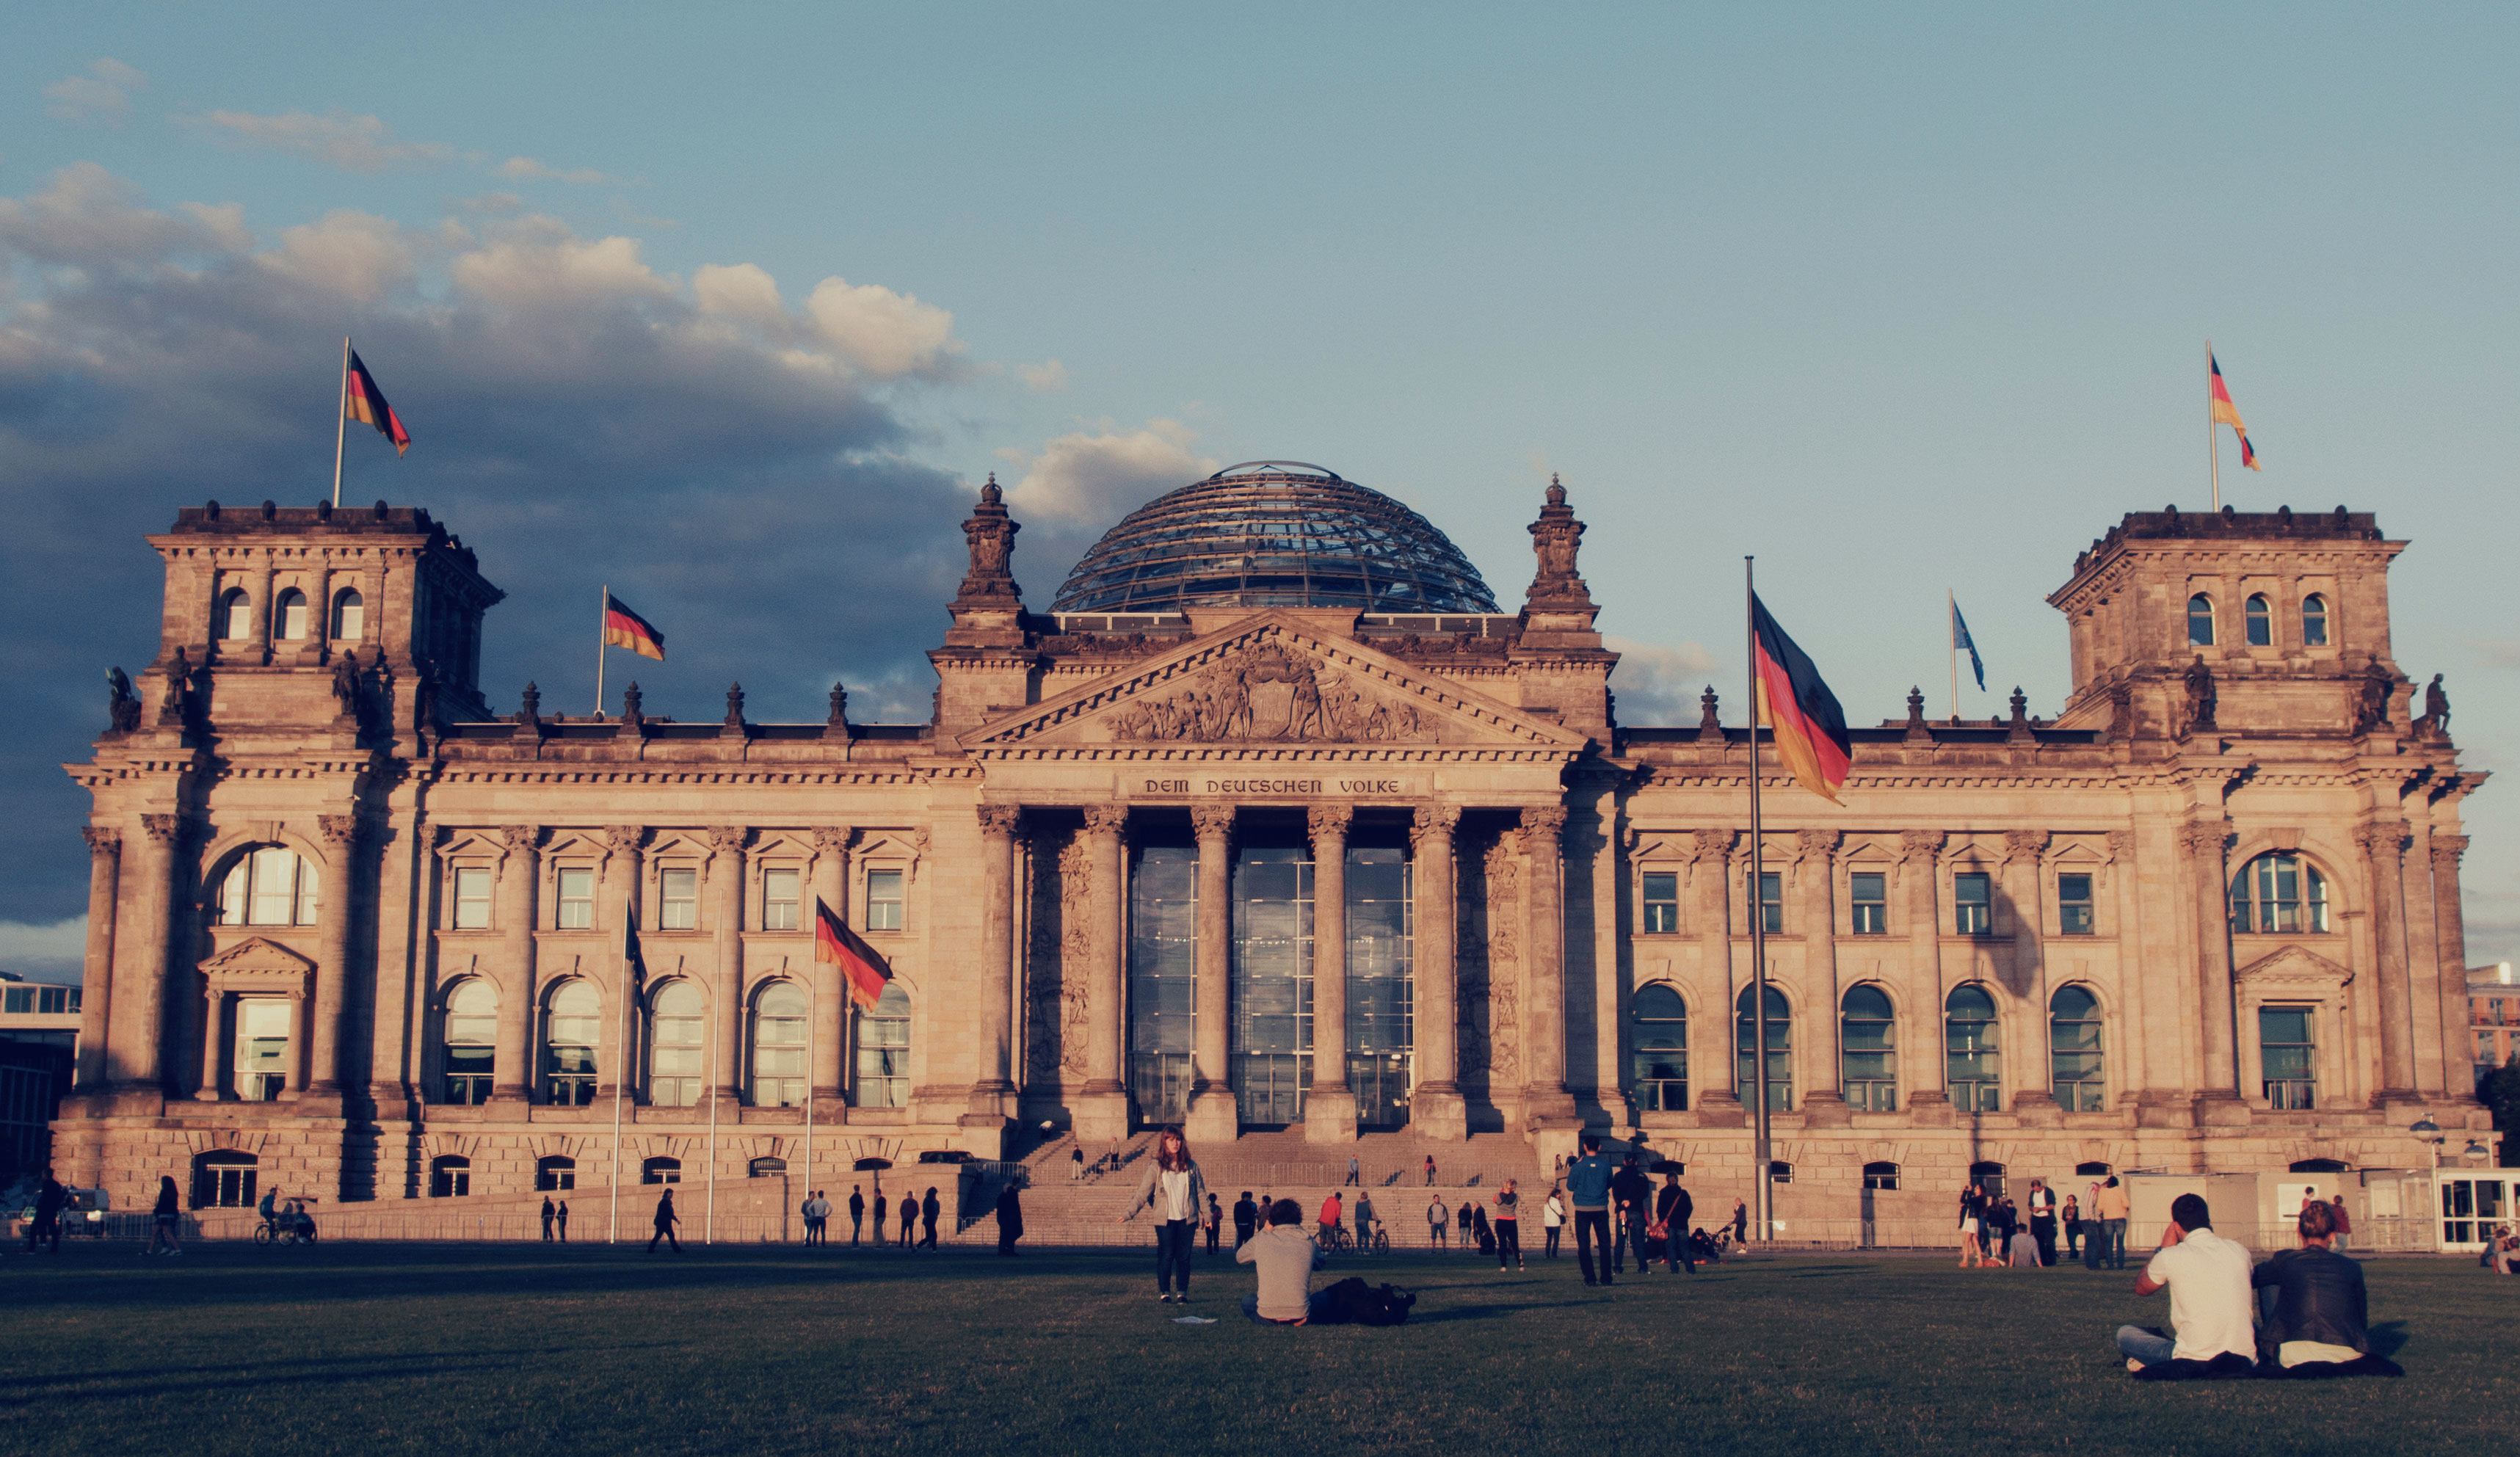 Free Image: Reichstag Building in Berlin | Libreshot Public Domain ...